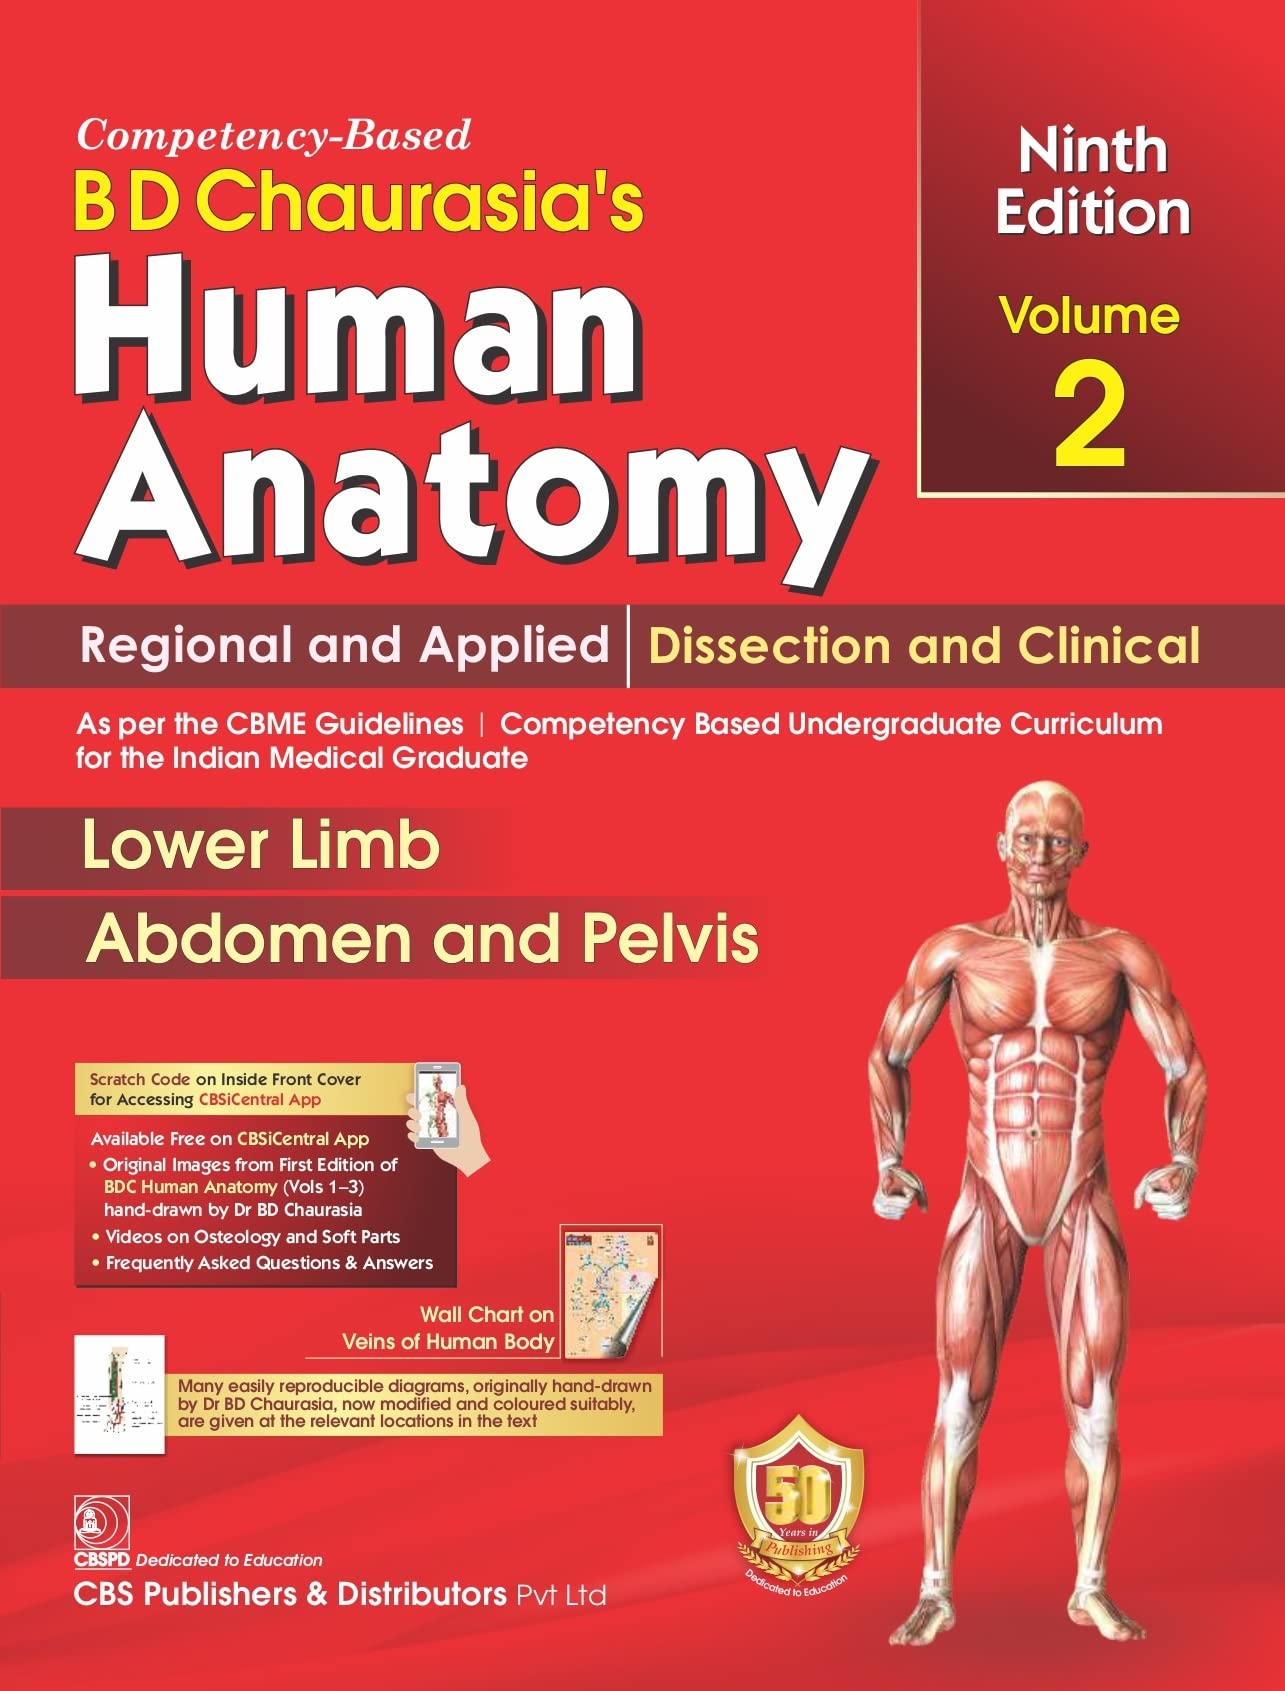 BD CHAURASIAS HUMAN ANATOMY 9ED VOL- 2 REGIONAL AND APPLIED DISSECTION & CLINICAL  (BDC)